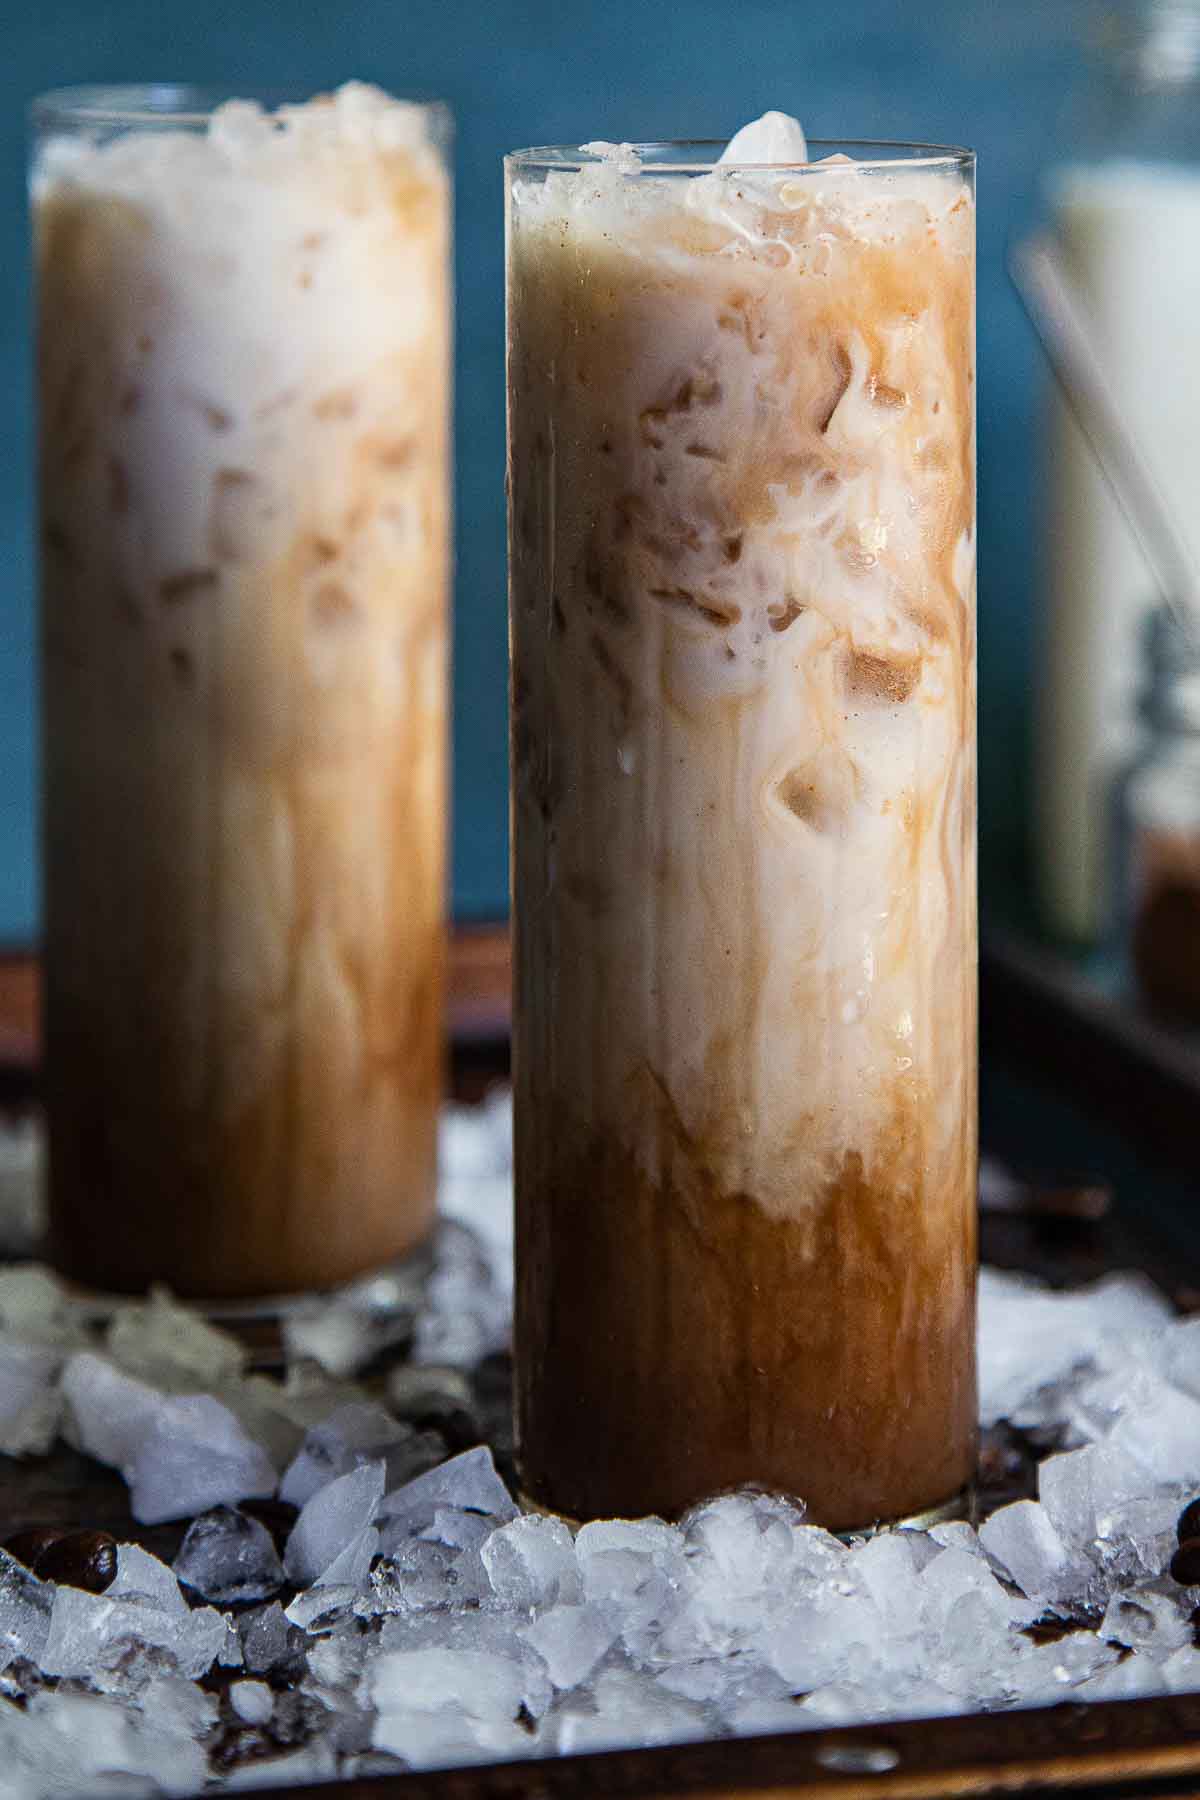 https://www.lucismorsels.com/wp-content/uploads/2020/08/Iced-Mexican-Mocha-Drink-Recipe-2-2.jpg